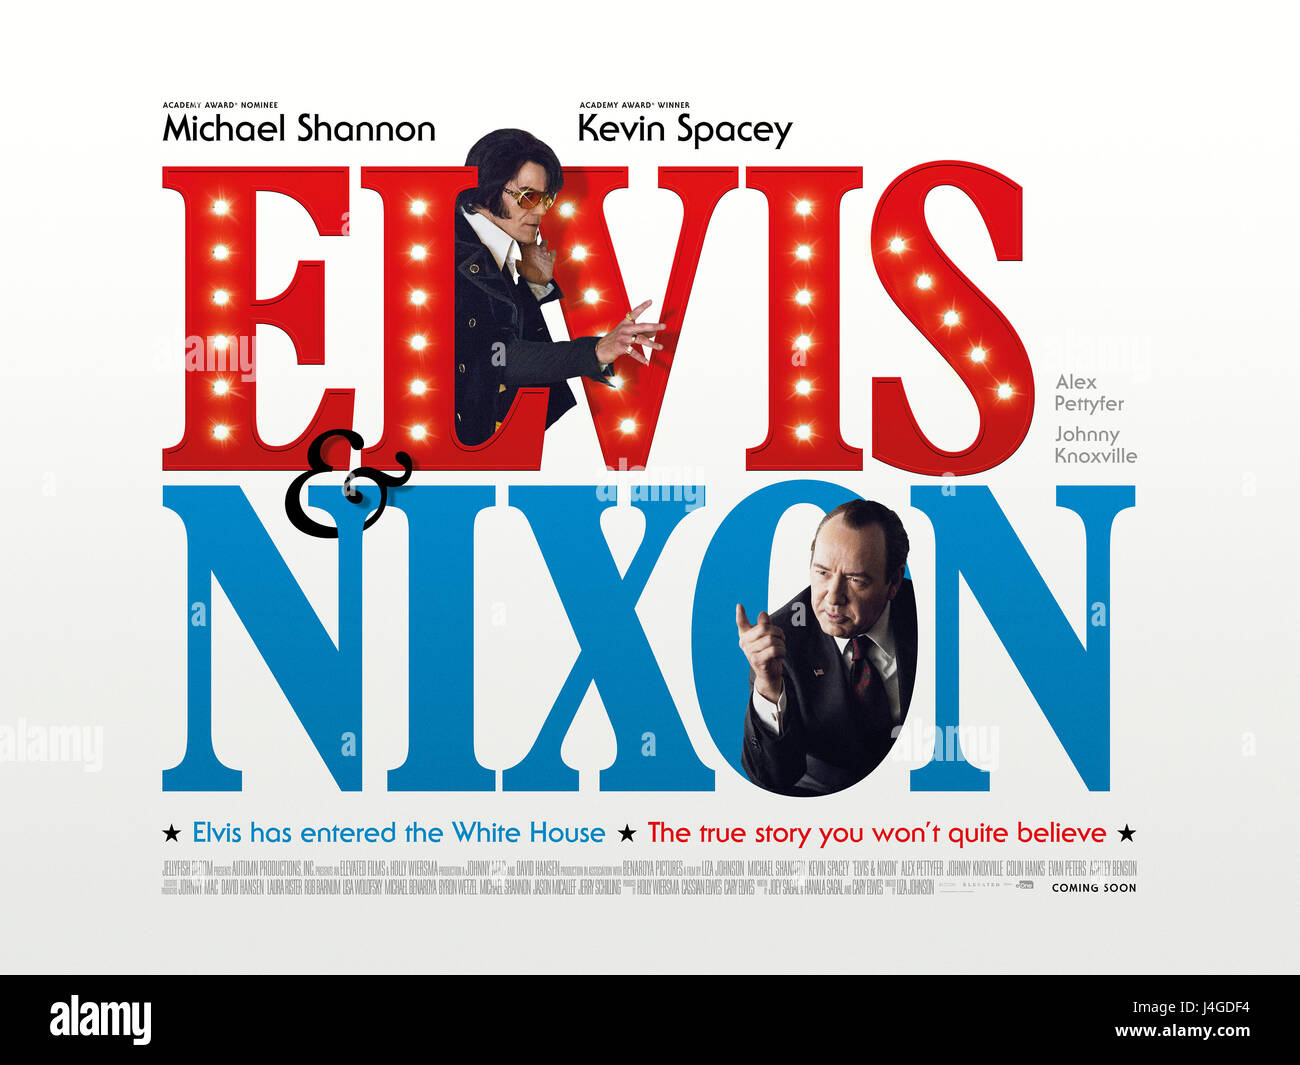 RELEASE DATE: April 23, 2016 TITLE: Elvis & Nixon STUDIO: Amazon Studios DIRECTOR: Liza Johnson PLOT: The untold true story behind the meeting between Elvis Presley, the King of Rock 'n Roll, and President Richard Nixon, resulting in this revealing, yet humorous moment immortalized in the most requested photograph in the National Archives. STARRING: Michael Shannon, Kevin Spacey, Alex Pettyfer. (Credit: © Amazon Studios /Entertainment Pictures) Stock Photo